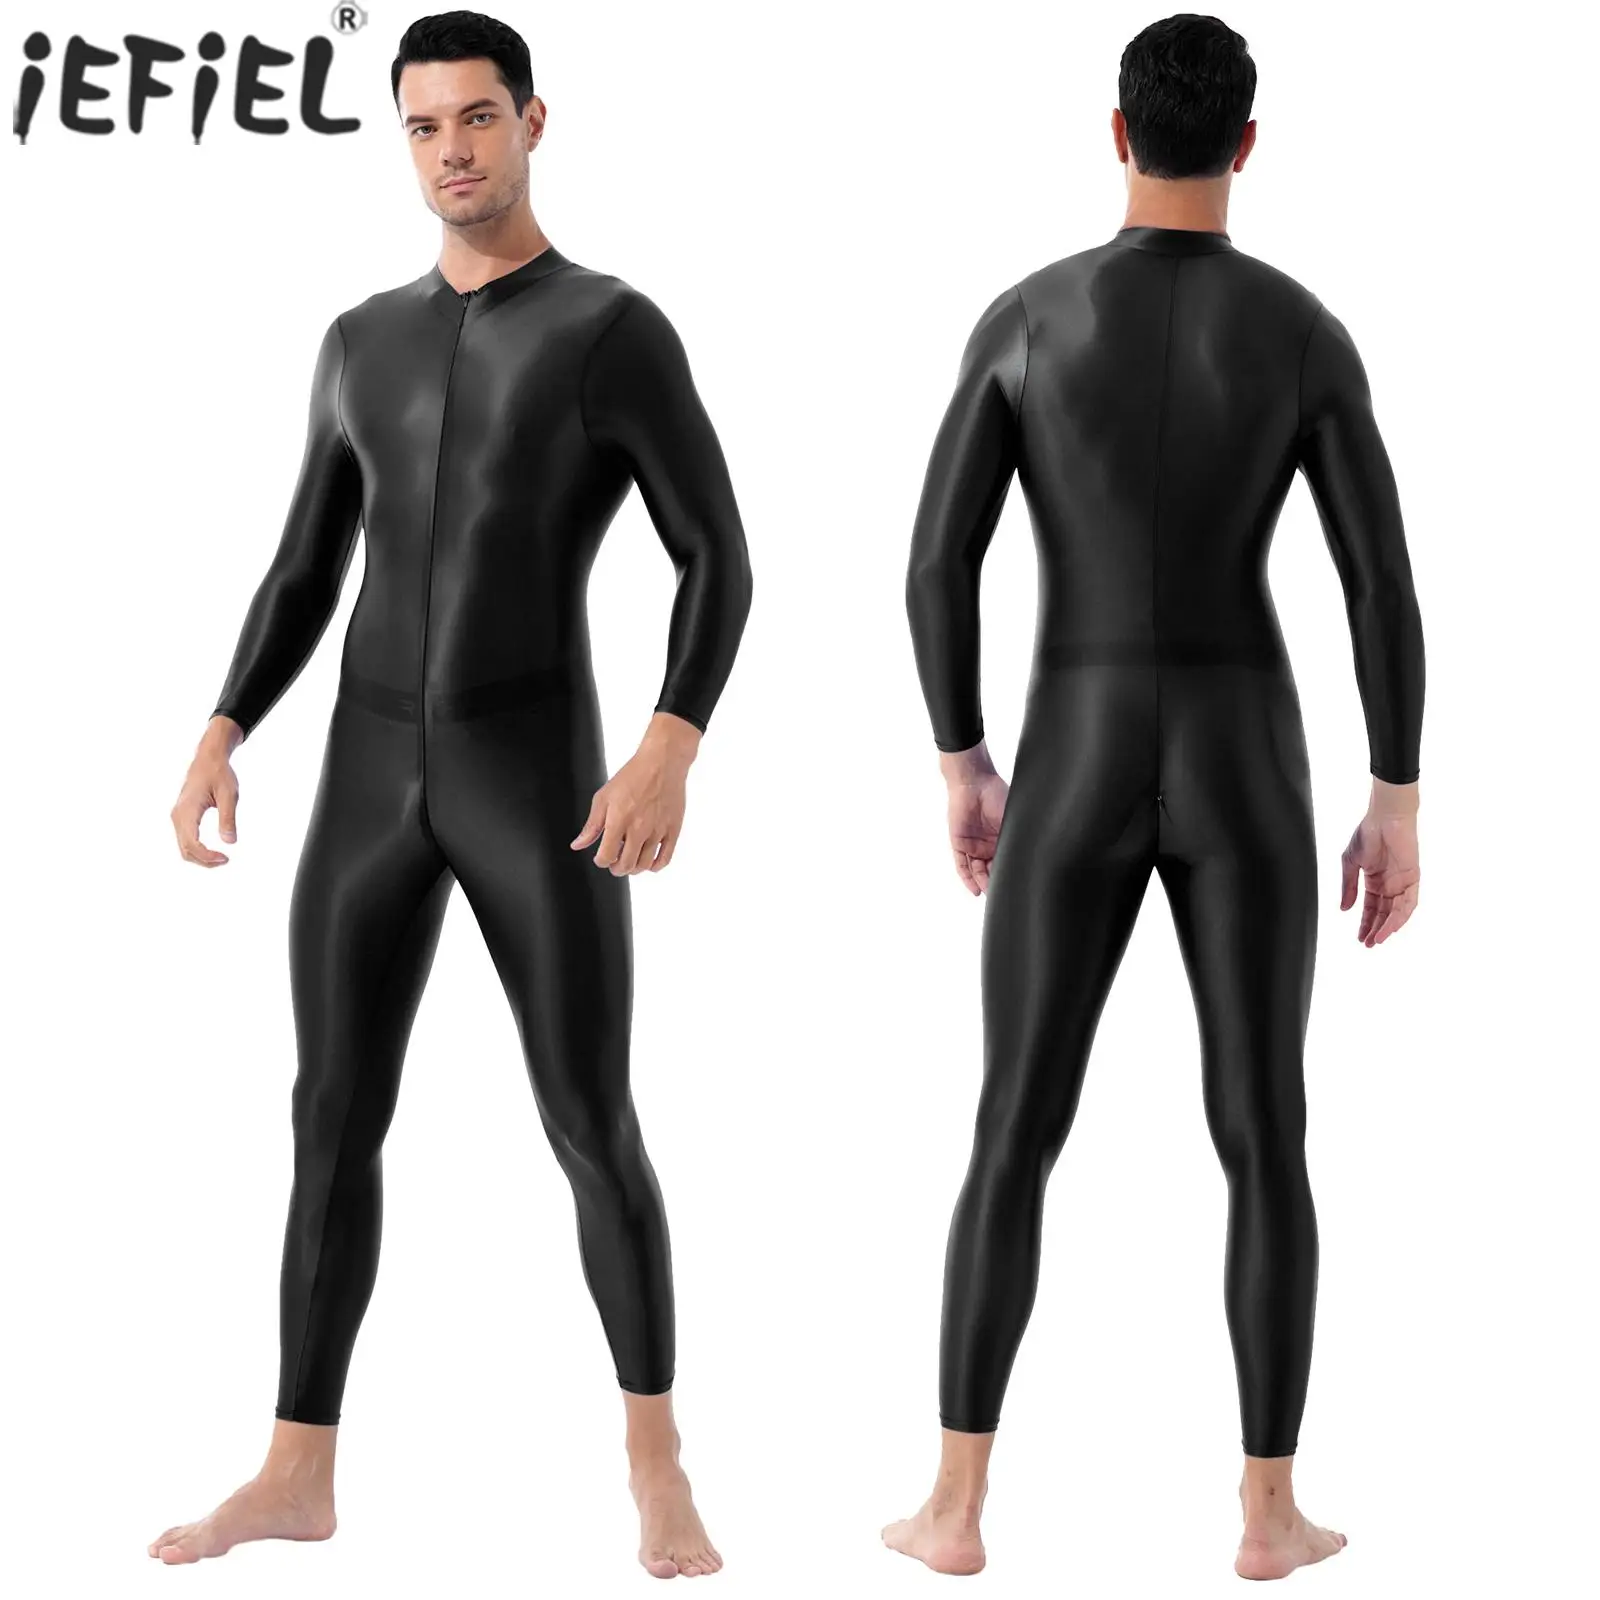 

Mens One-piece Black Shimmery Smooth Lingerie High Neck Long Sleeves Ankle Length Double-ended Zipper Leotard Bodysuit Jumpsuit